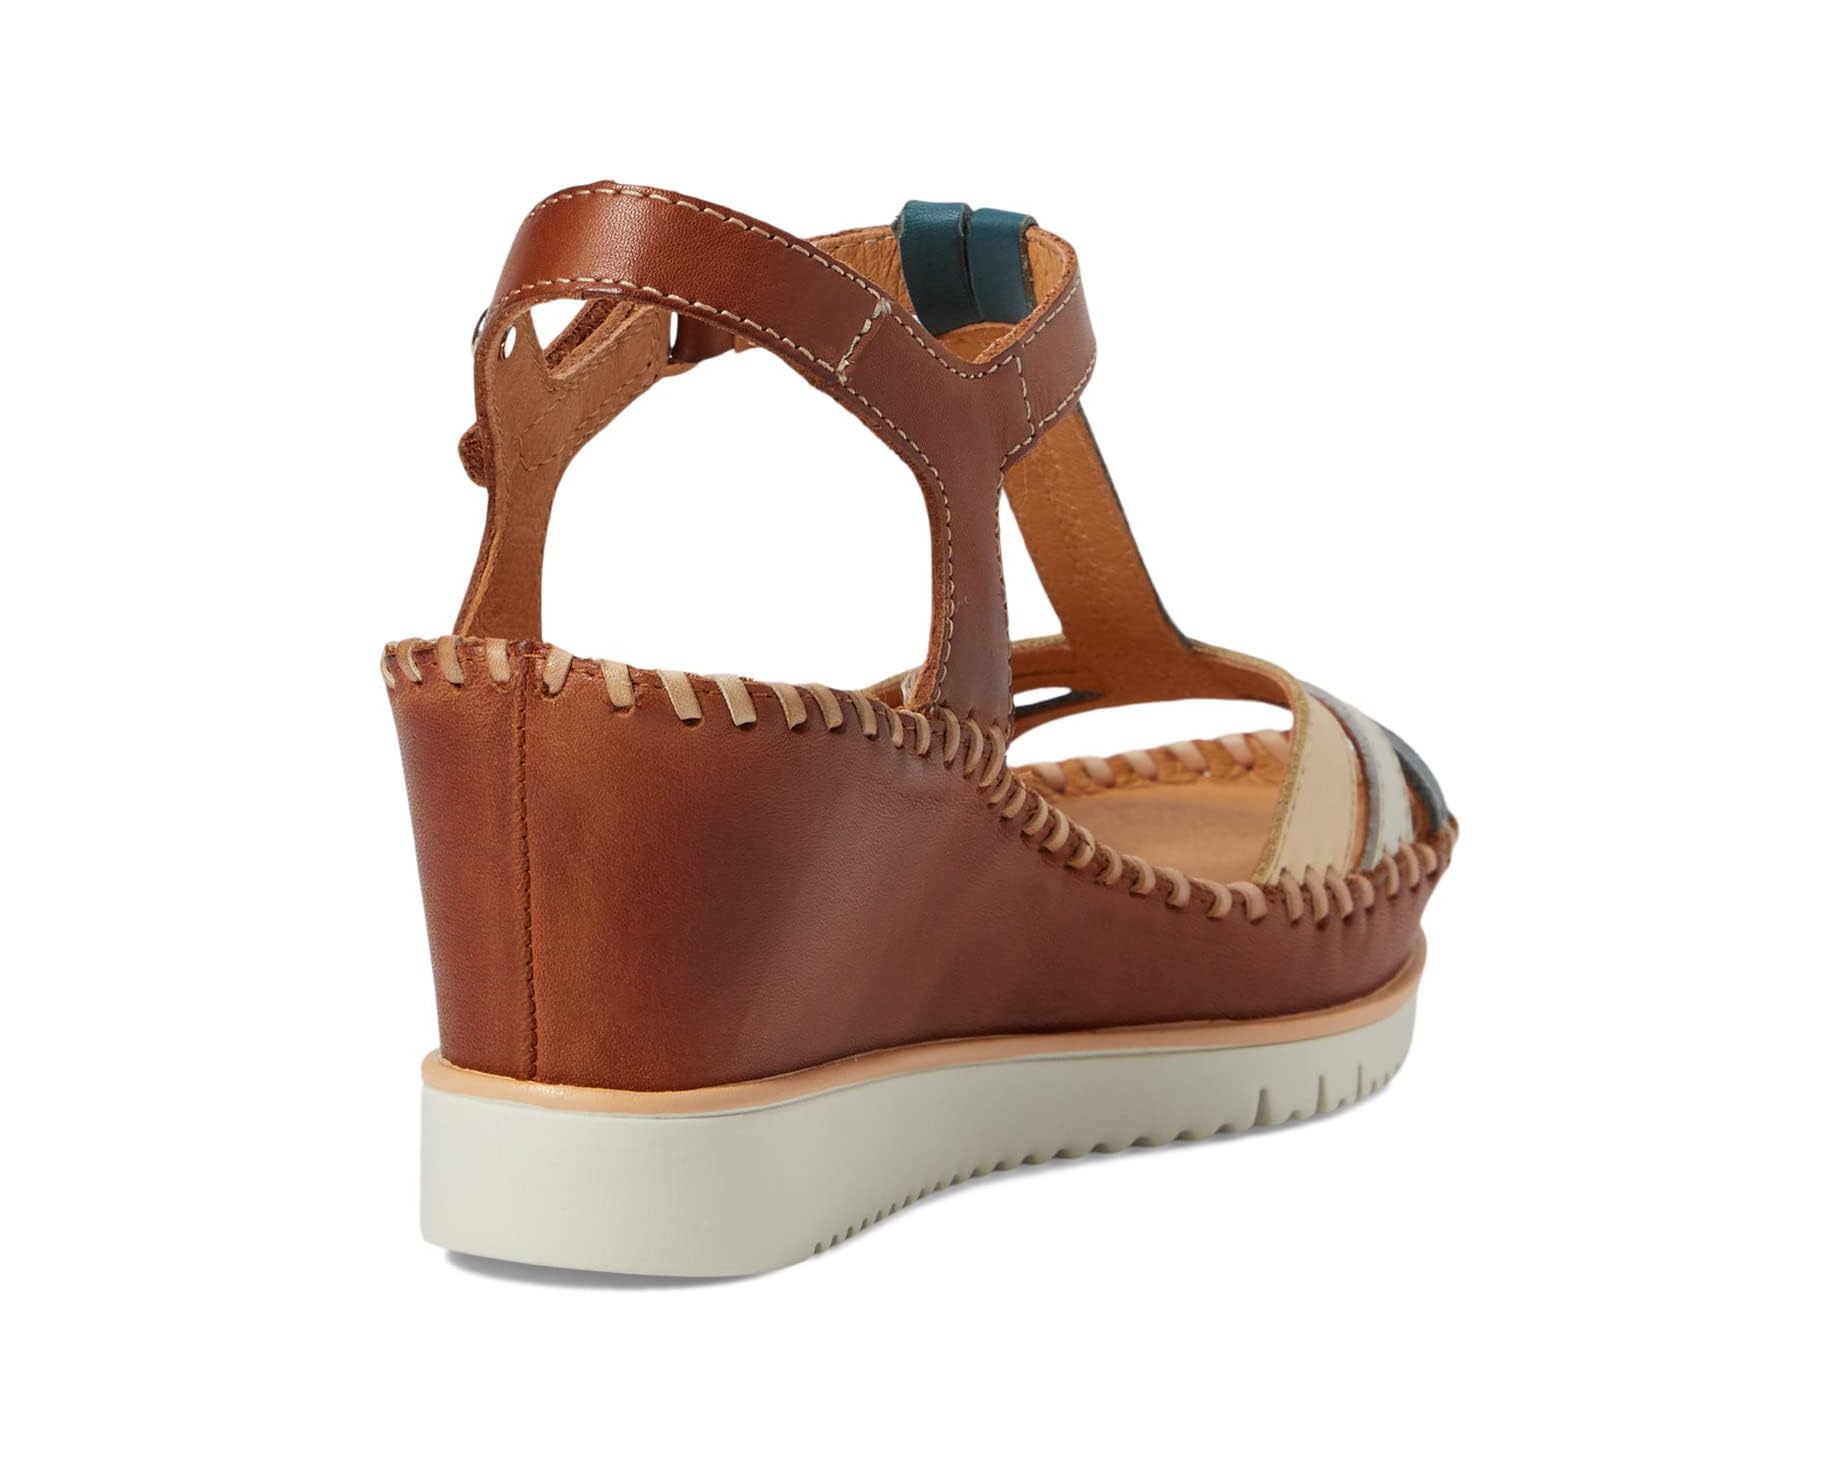 Pikolinos Aguadulce Wedge Sandals Women's 6